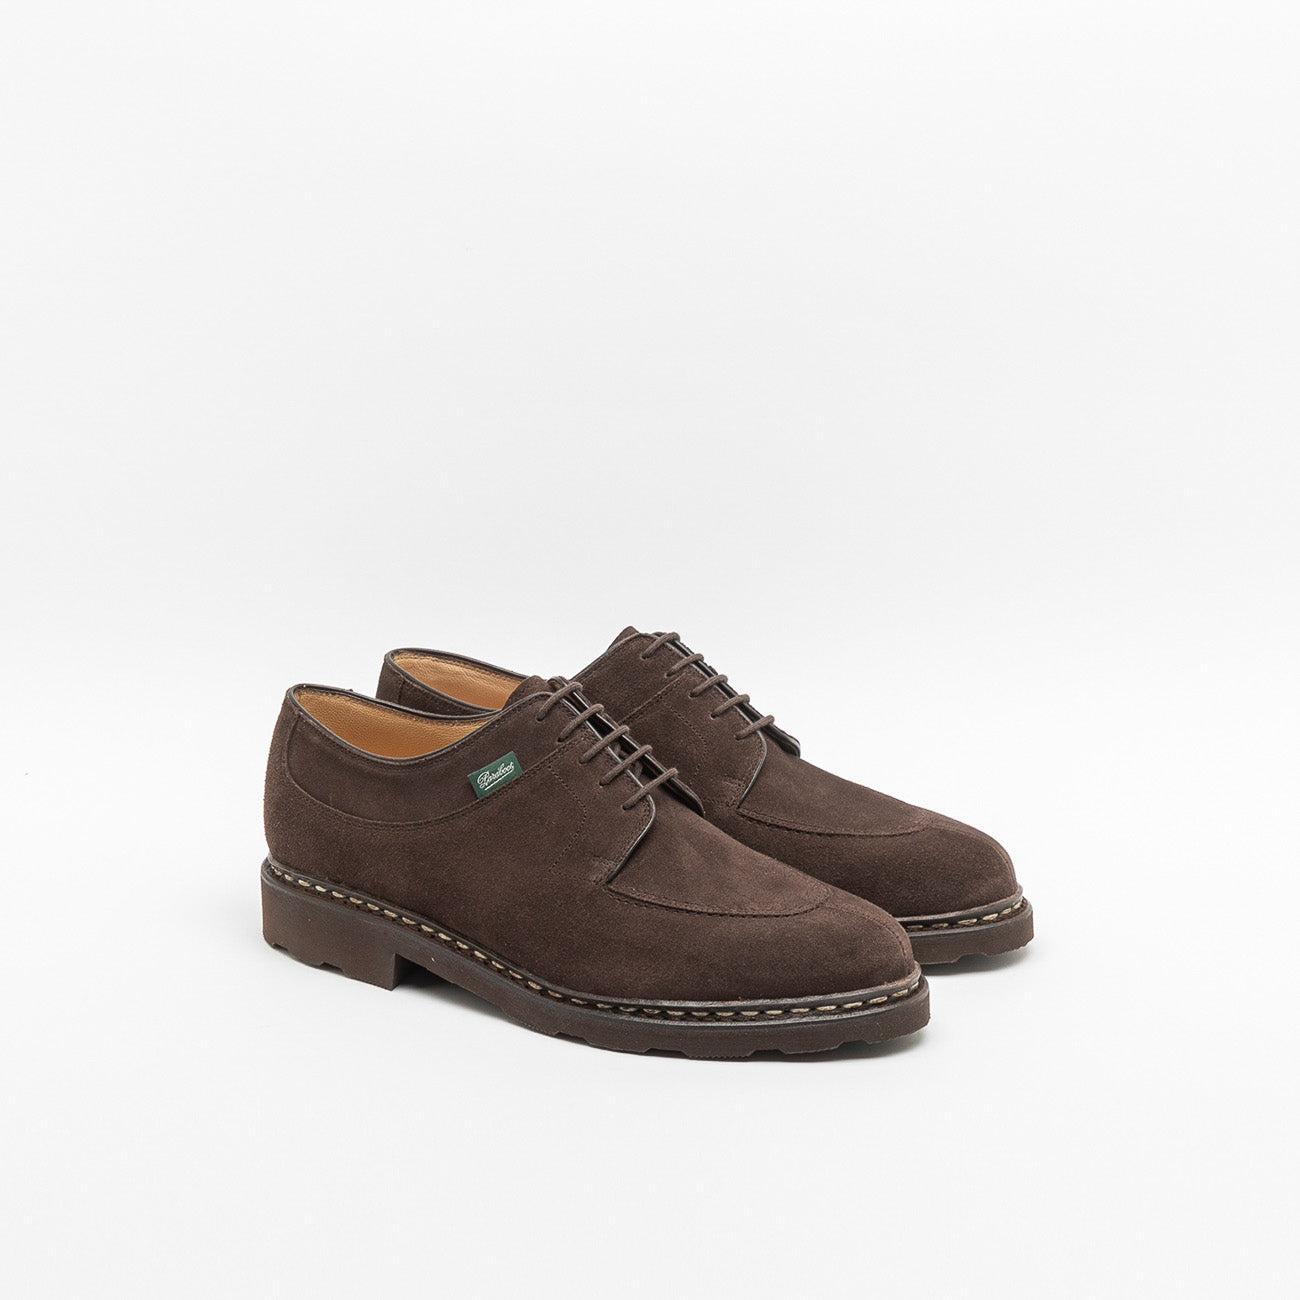 Paraboot Avignon Griff lace-up shoe in congo brown suede